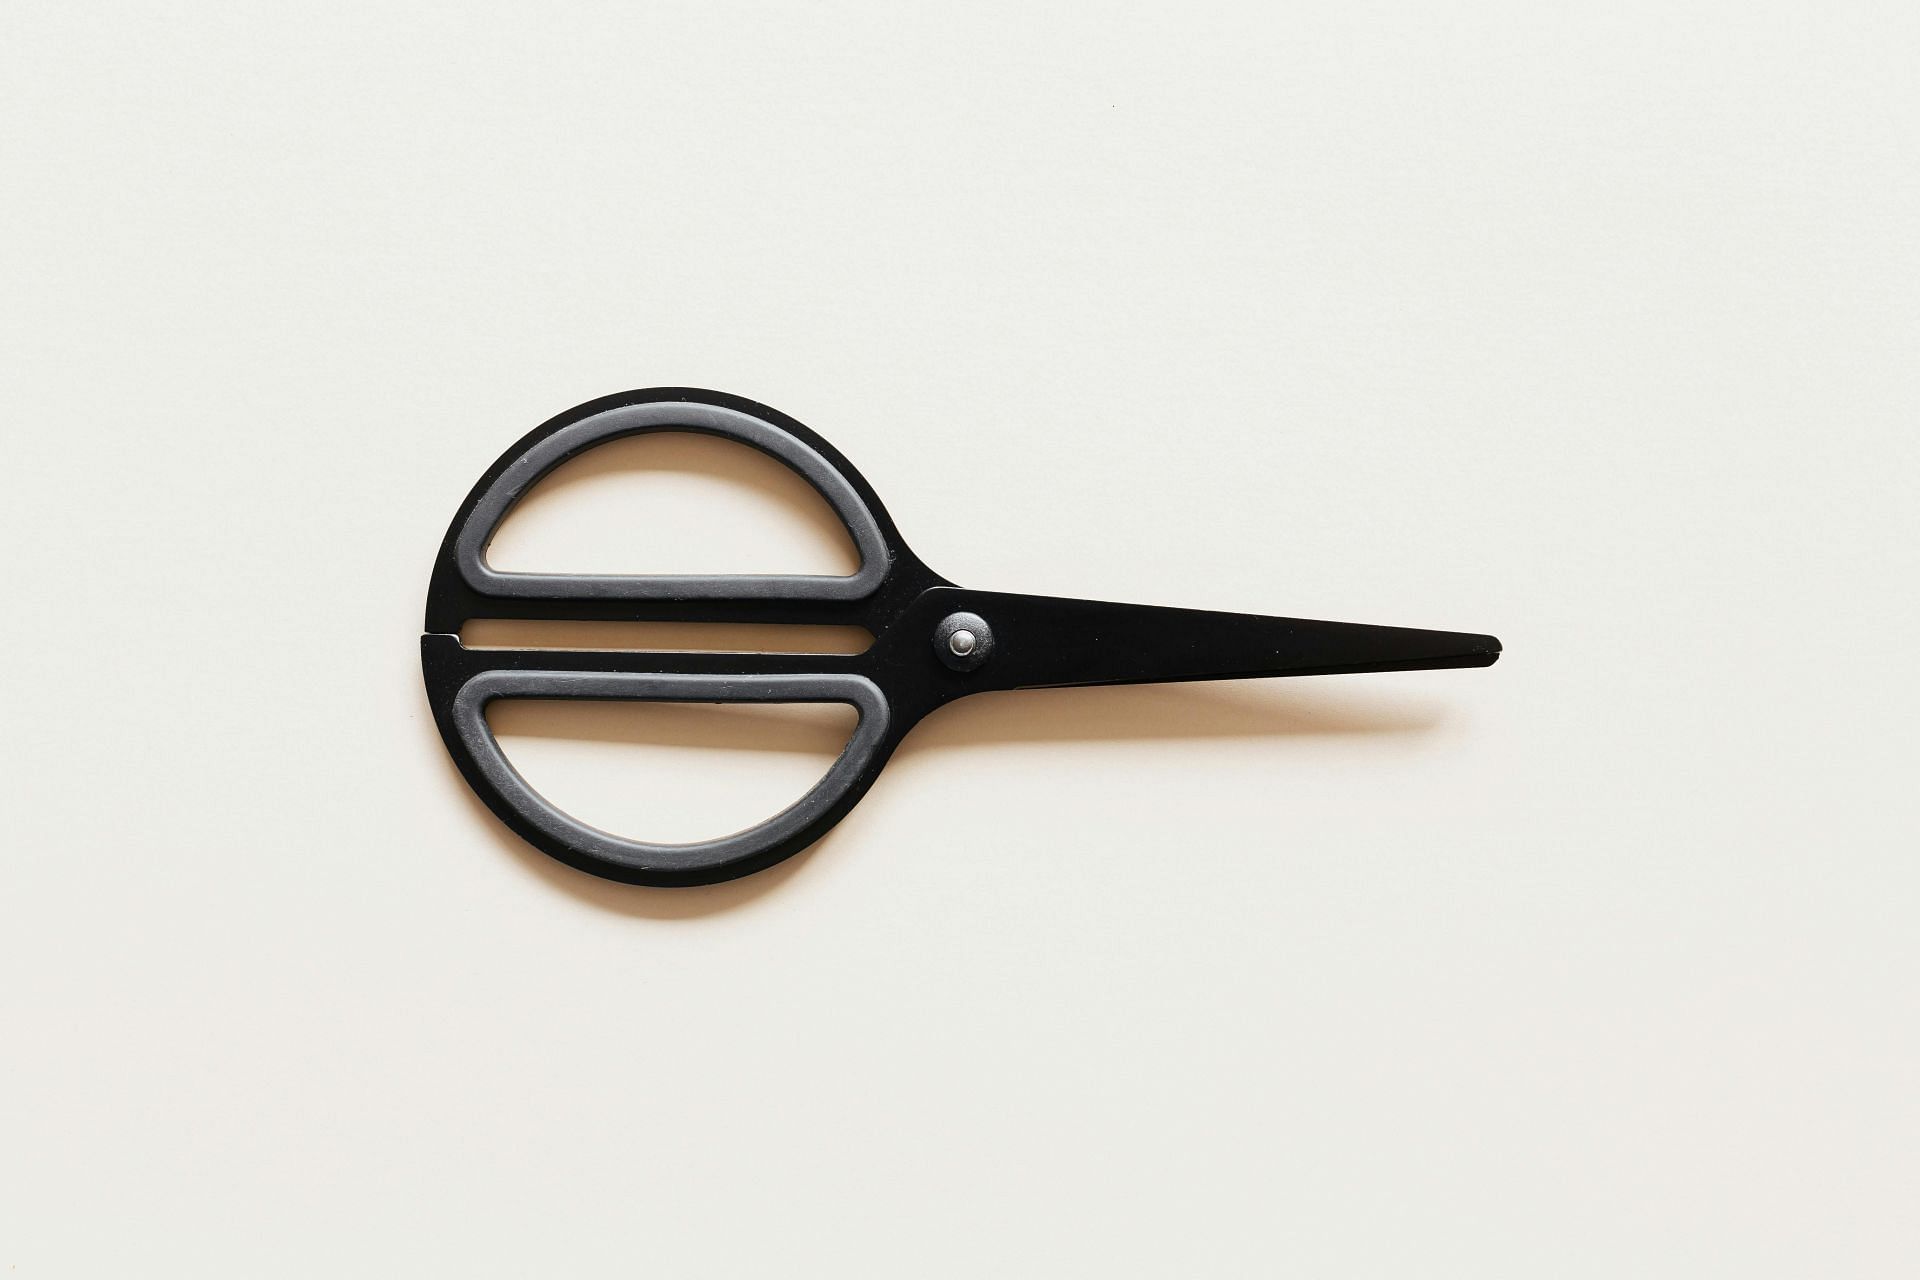 Scissors can be used for trimming. (Image via Pexels)